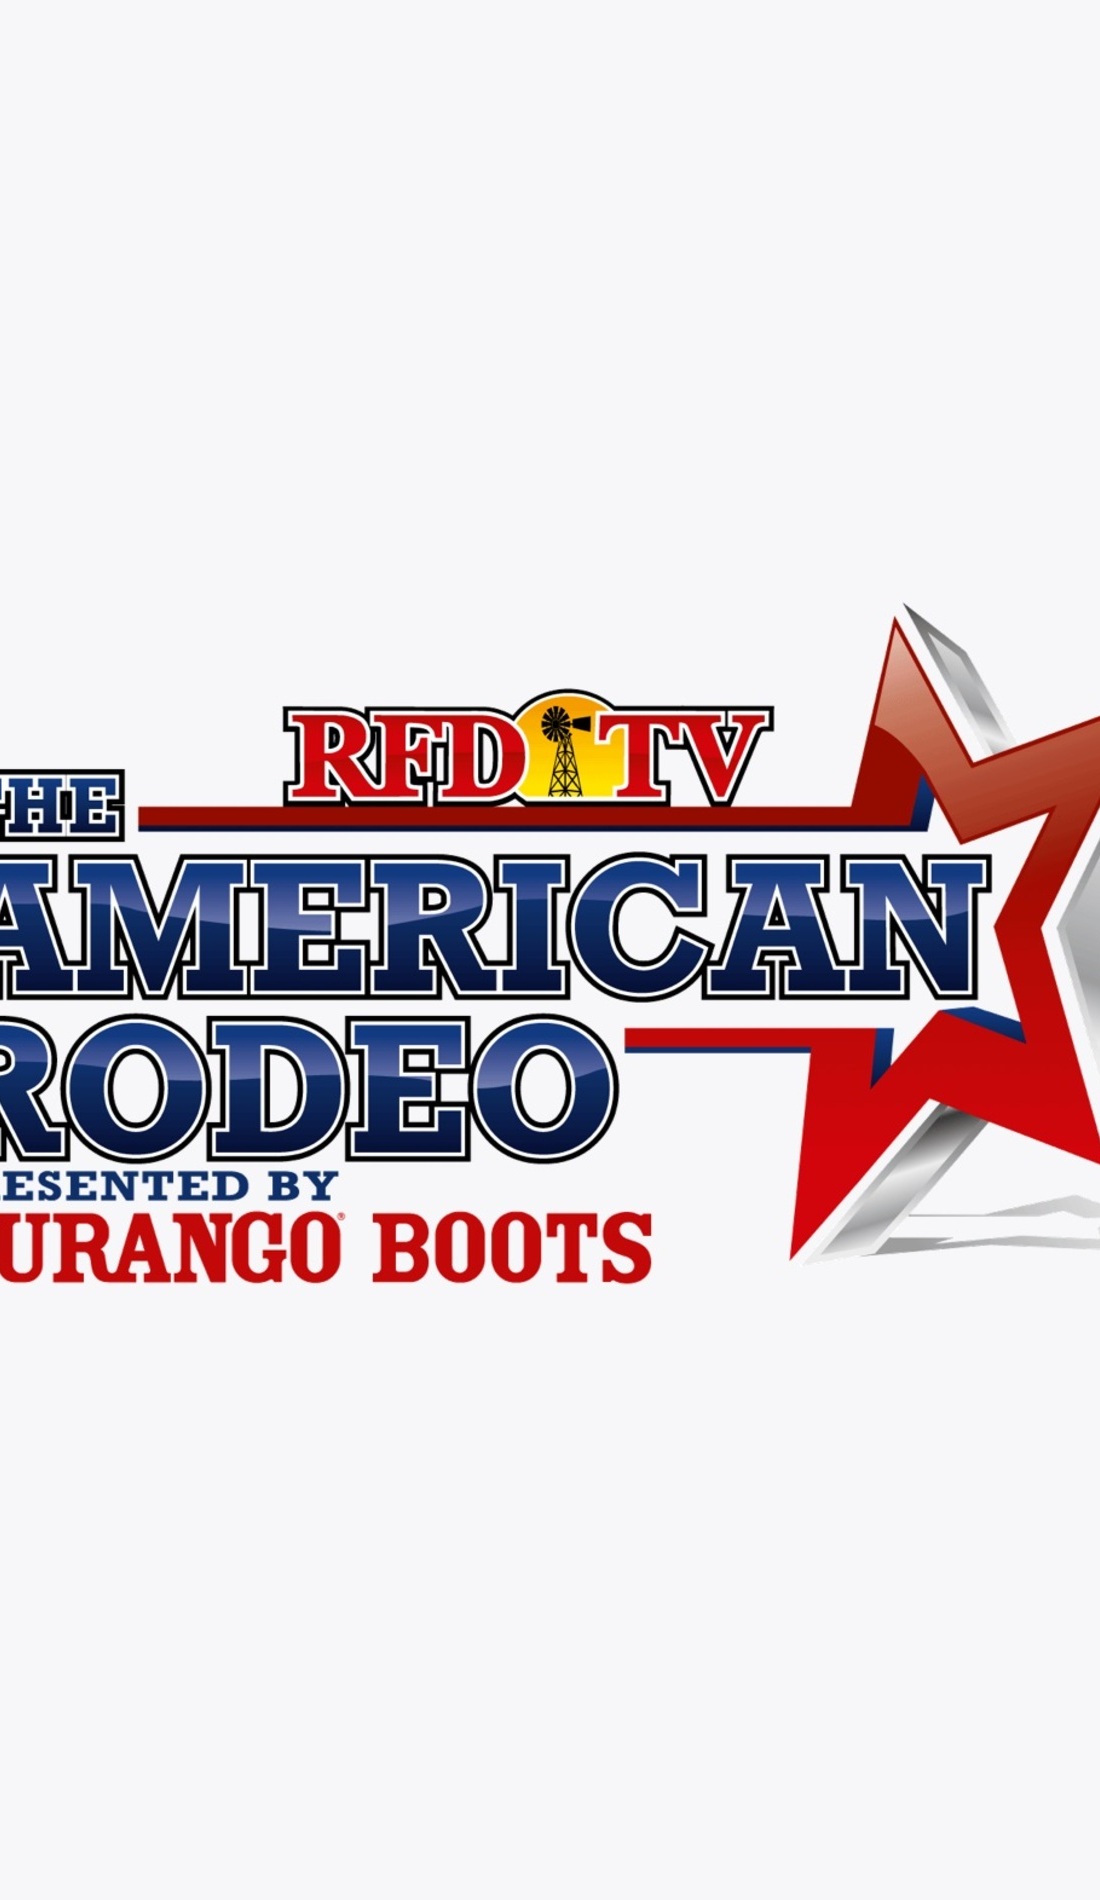 A RFD TV's The American live event